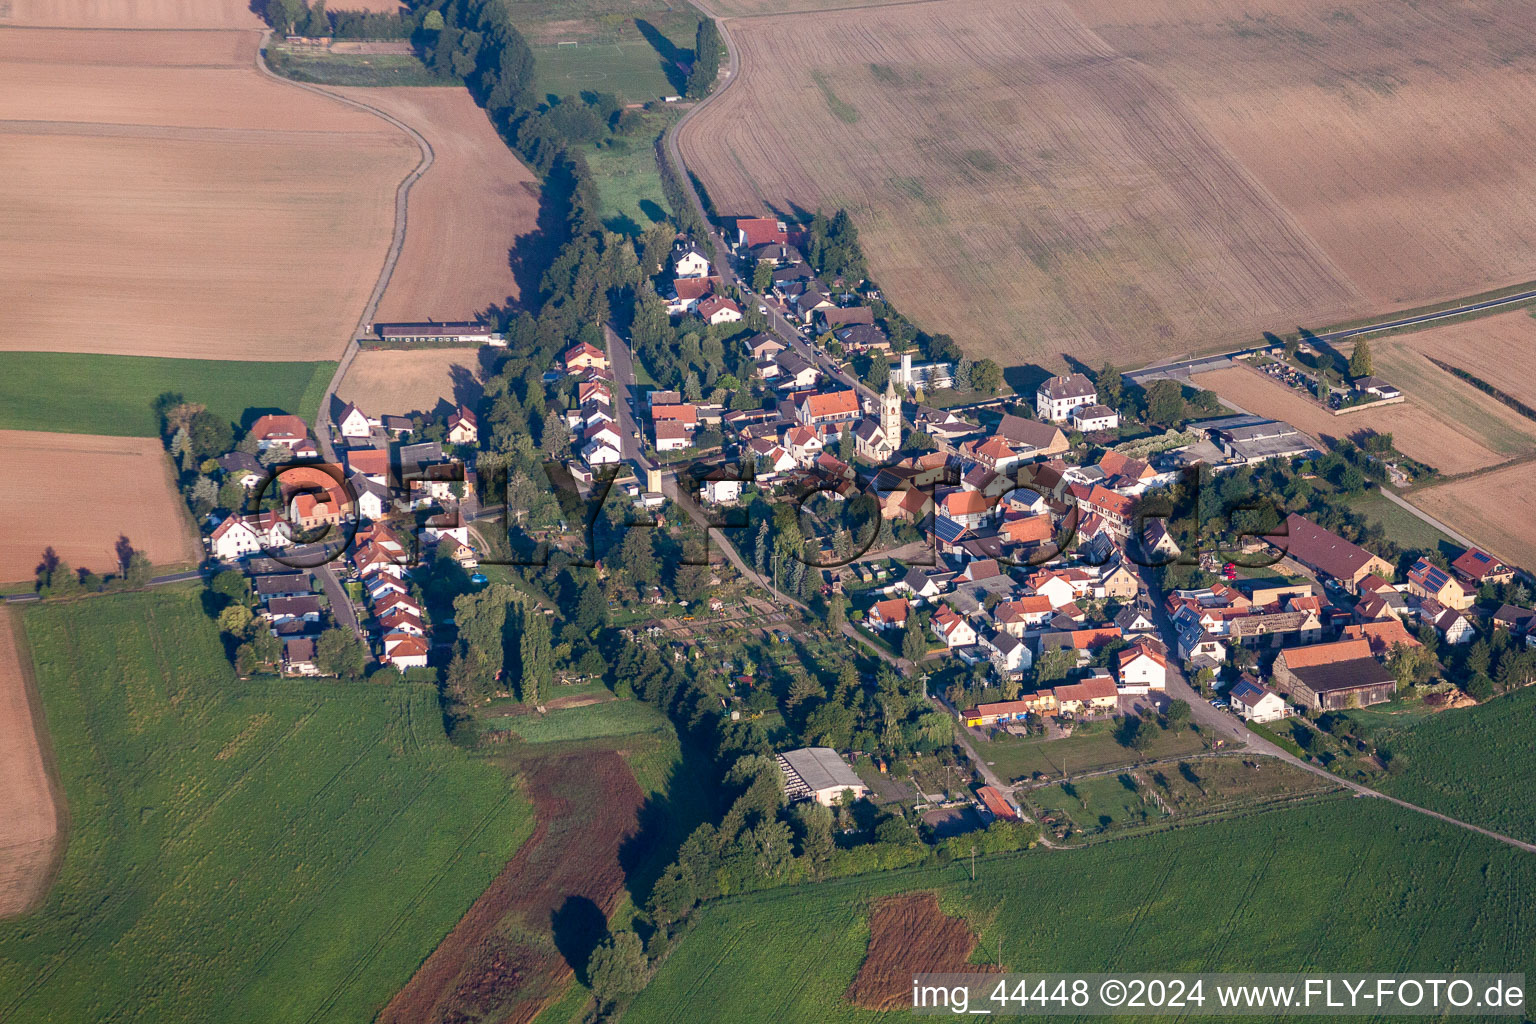 Village - view on the edge of agricultural fields and farmland in Mertesheim in the state Rhineland-Palatinate, Germany